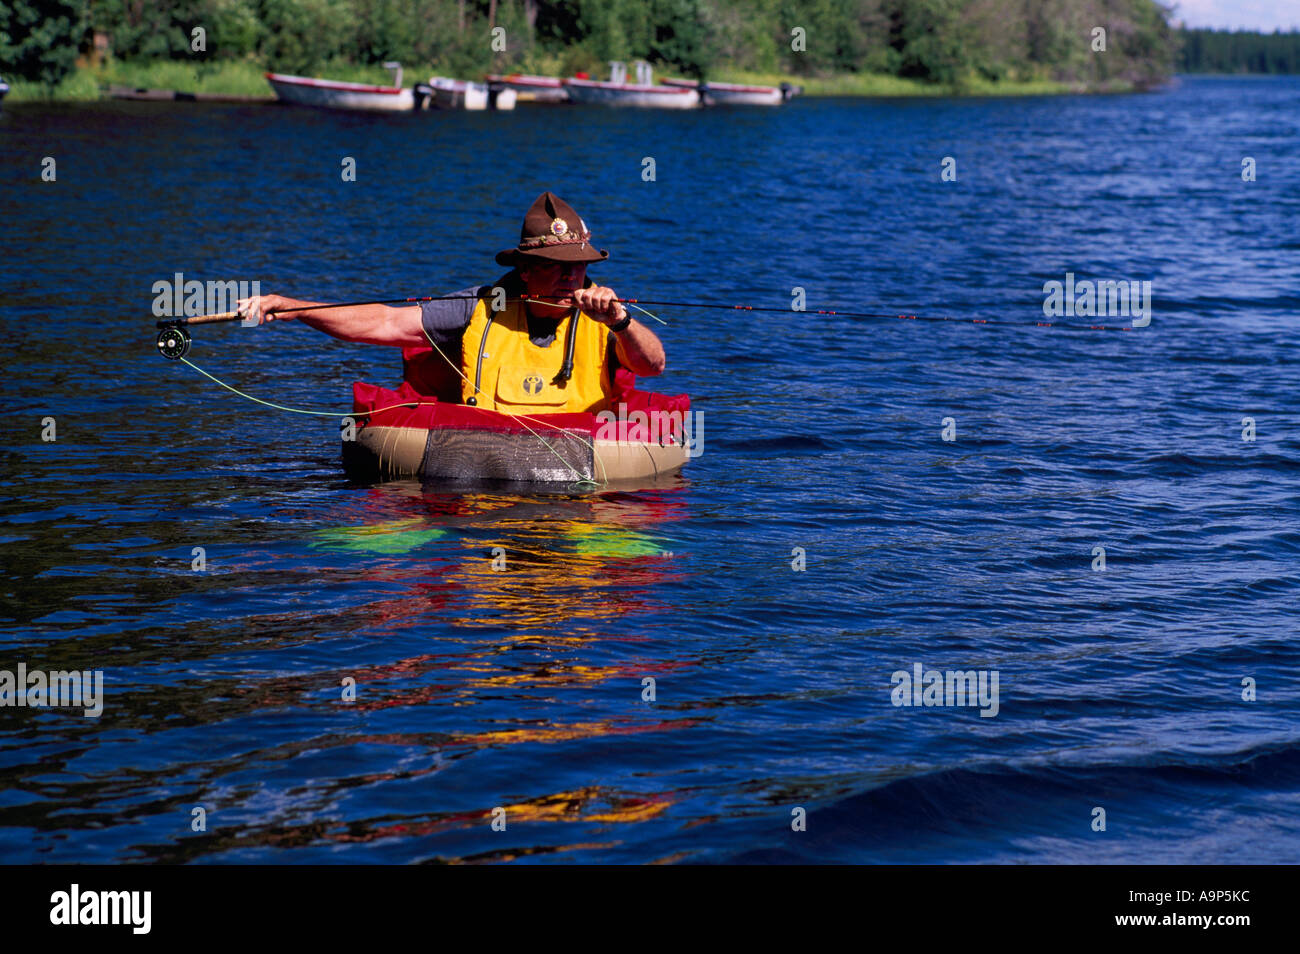 https://c8.alamy.com/comp/A9P5KC/fly-fisherman-in-a-belly-boat-fishing-for-trout-in-hi-hium-lake-in-A9P5KC.jpg